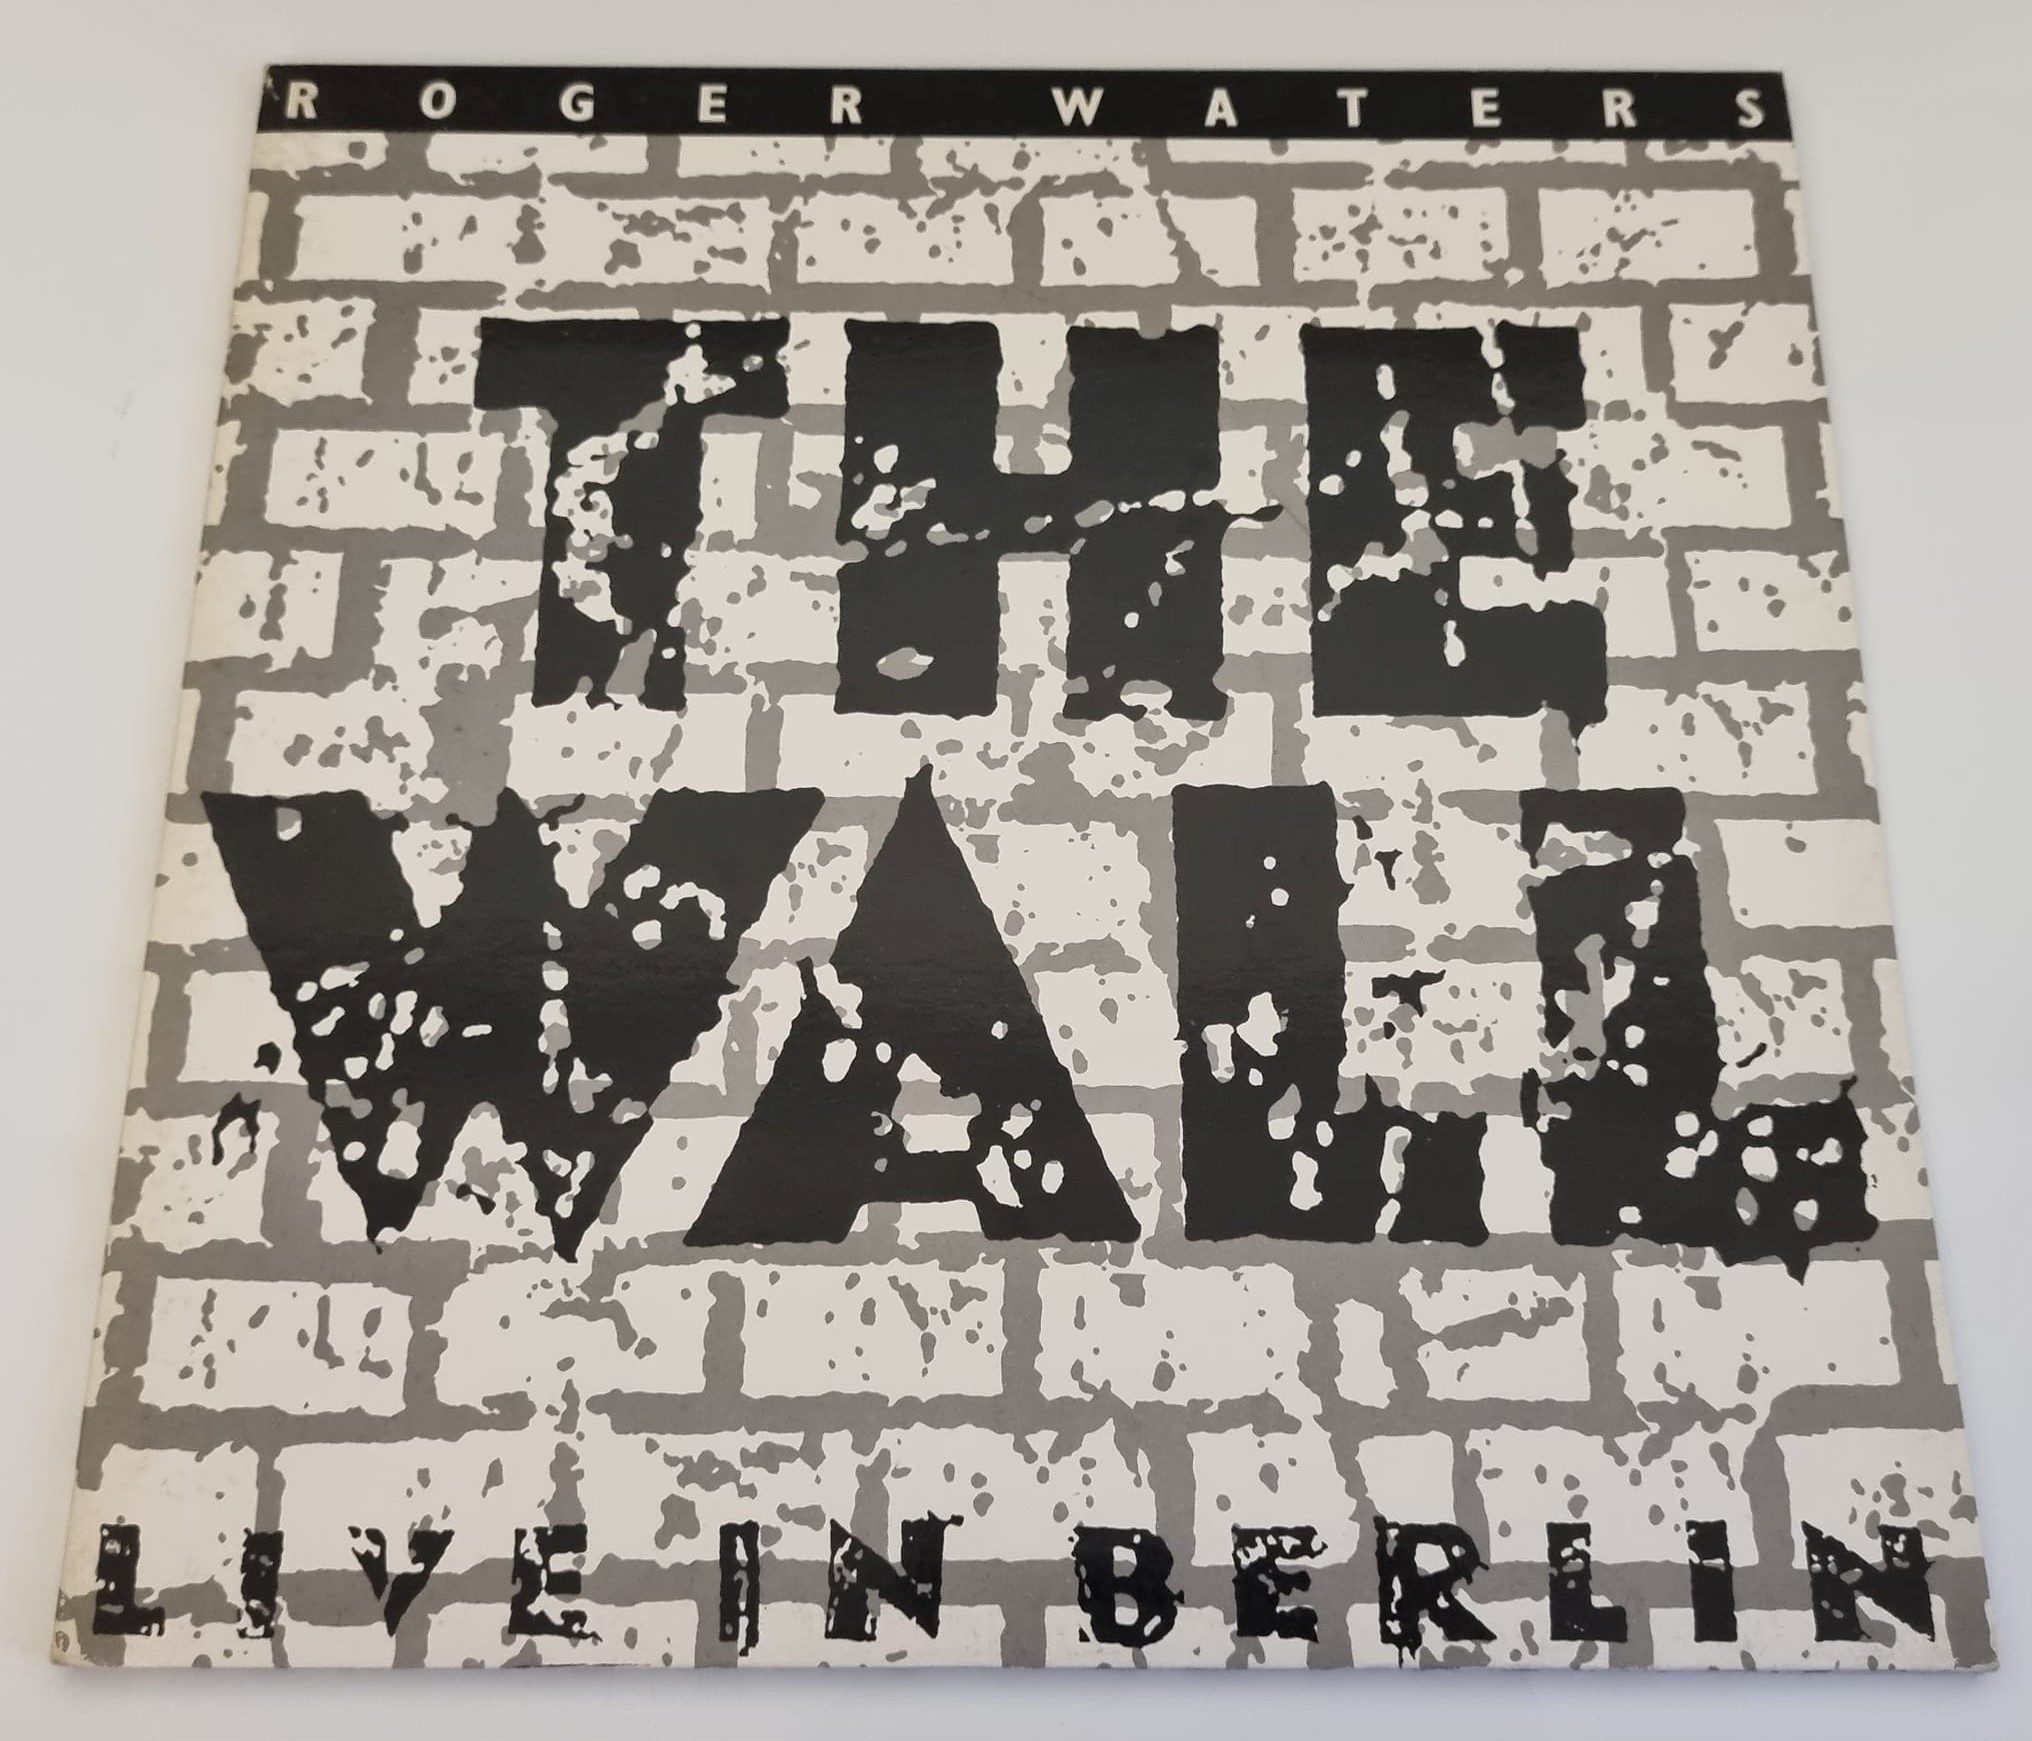 Buy this rare Roger Waters record by clicking here